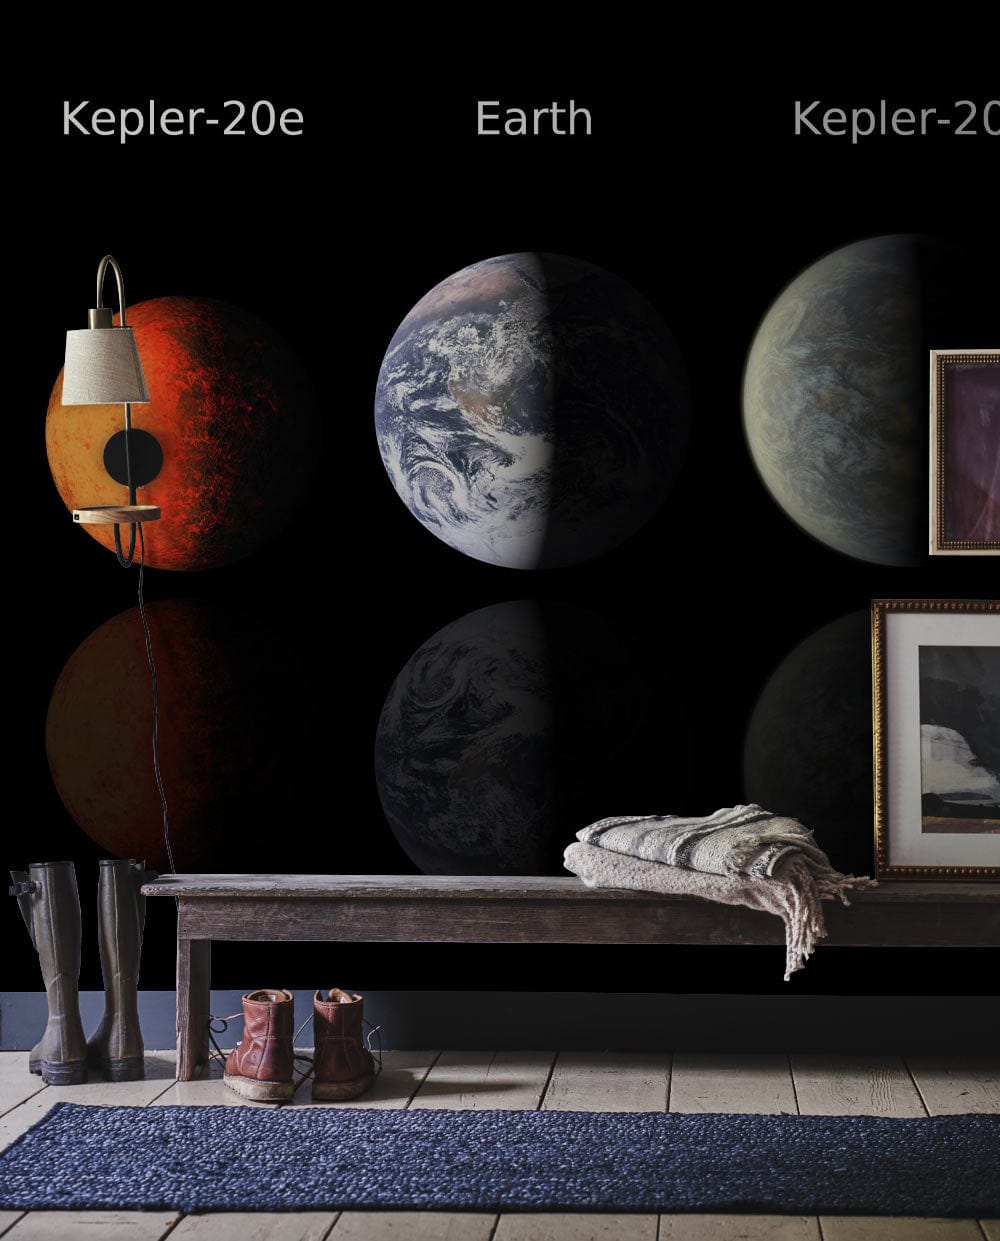  Exoplanets Space Wallpaper Decoration